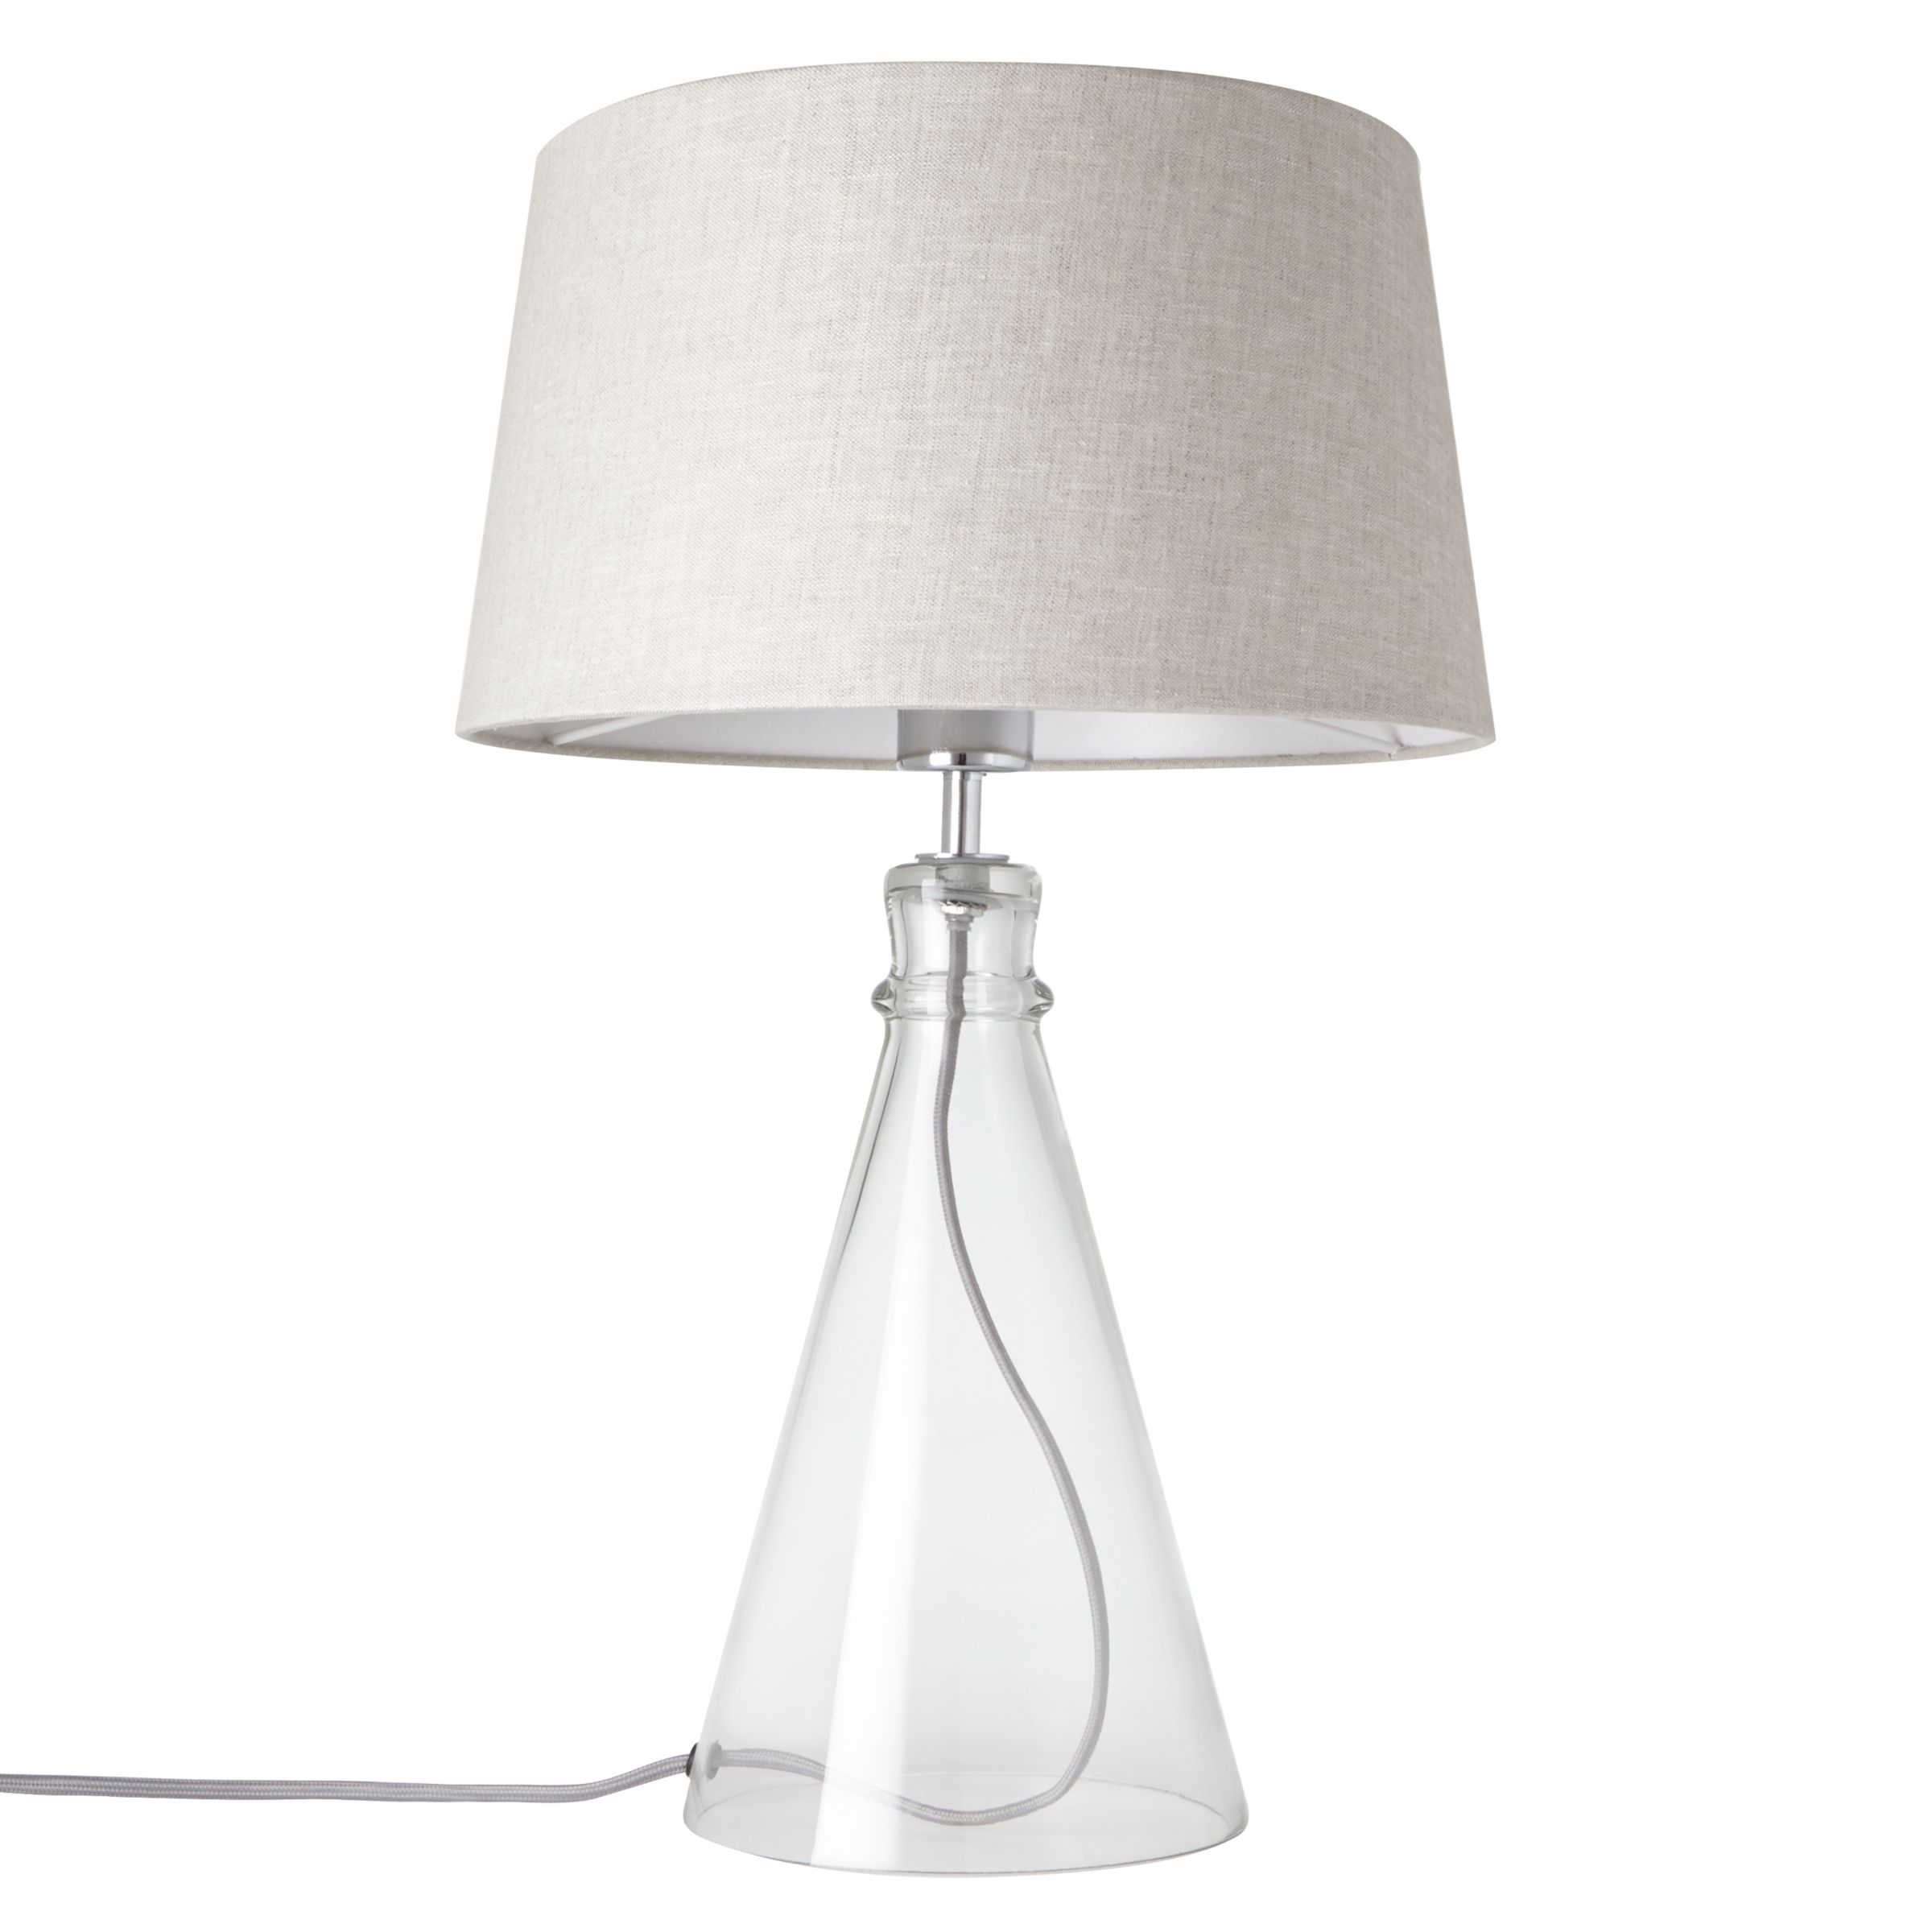 Croft Collection Abel glass bell table lamp